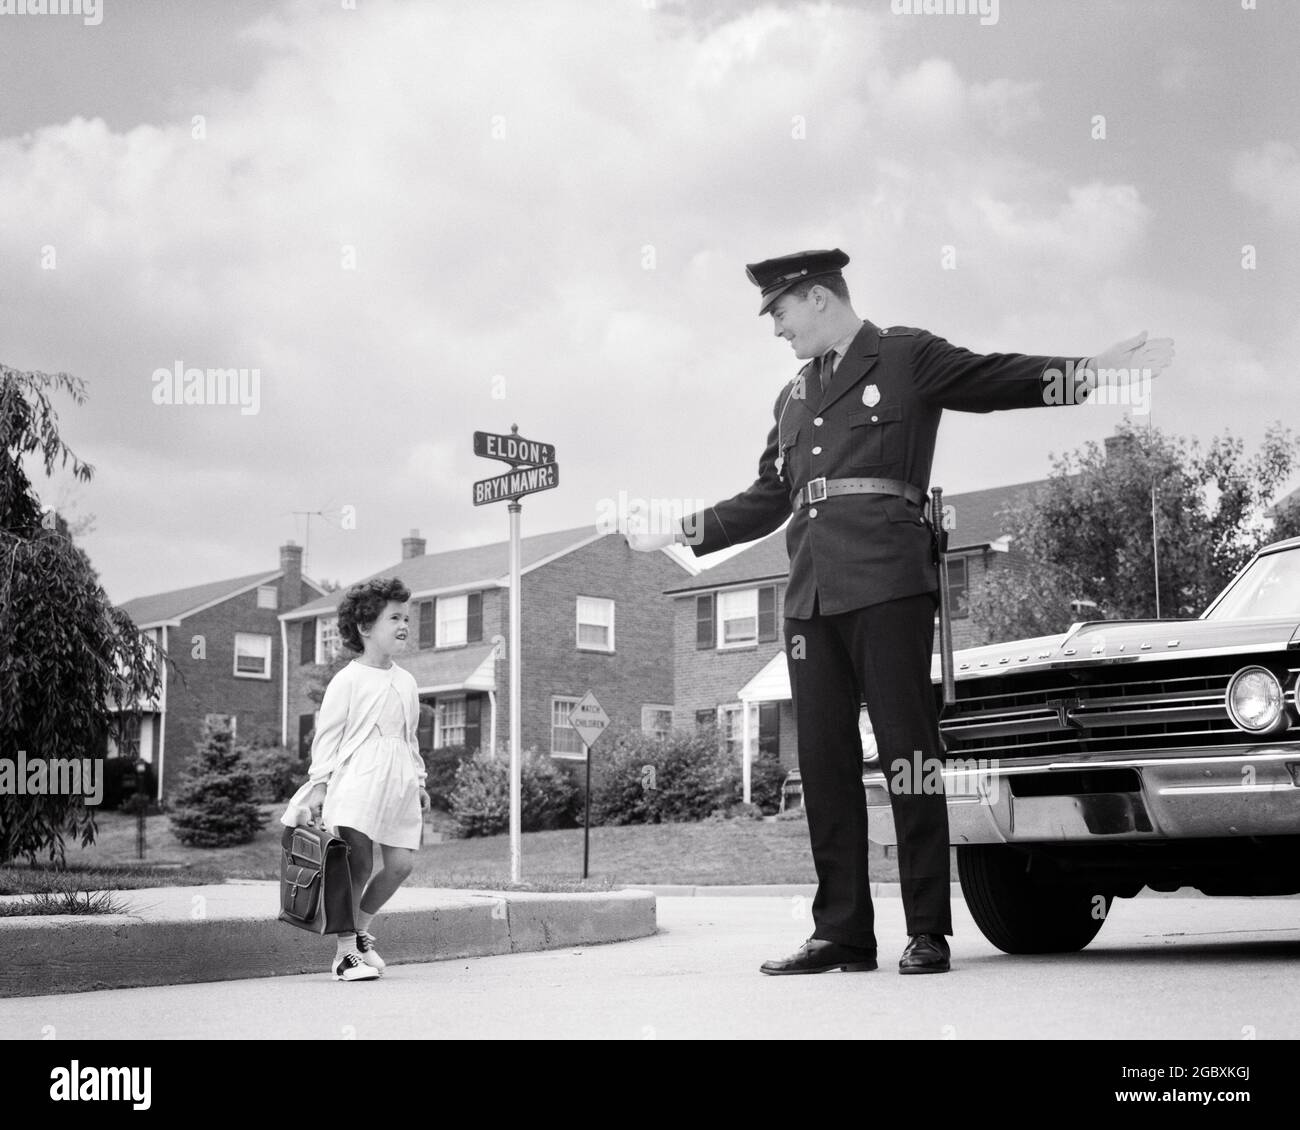 1960s SMILING POLICE OFFICER MAN STOPPING CAR TRAFFIC TO LET LITTLE SCHOOL GIRL CARRYING BOOK BAG SAFELY CROSS SUBURBAN STREET  - p6950 HAR001 HARS AUTO 1 POLICEMAN JUVENILE COMMUNICATION SERVE VEHICLE SAFETY PUBLIC PLEASED JOY LIFESTYLE FEMALES COPY SPACE FULL-LENGTH PERSONS AUTOMOBILE CARING MALES RISK ORDER OFFICER CONFIDENCE TRANSPORTATION B&W COP WIDE ANGLE PROTECT CHEERFUL ADVENTURE PROTECTION STRENGTH AND AUTOS POWERFUL PRIDE TO AUTHORITY OCCUPATIONS SMILES UNIFORMS CONCEPTUAL AUTOMOBILES JOYFUL STOPPING VEHICLES LET OFFICERS POLICEMEN COPS GROWTH JUVENILES MID-ADULT MID-ADULT MAN BADGE Stock Photo